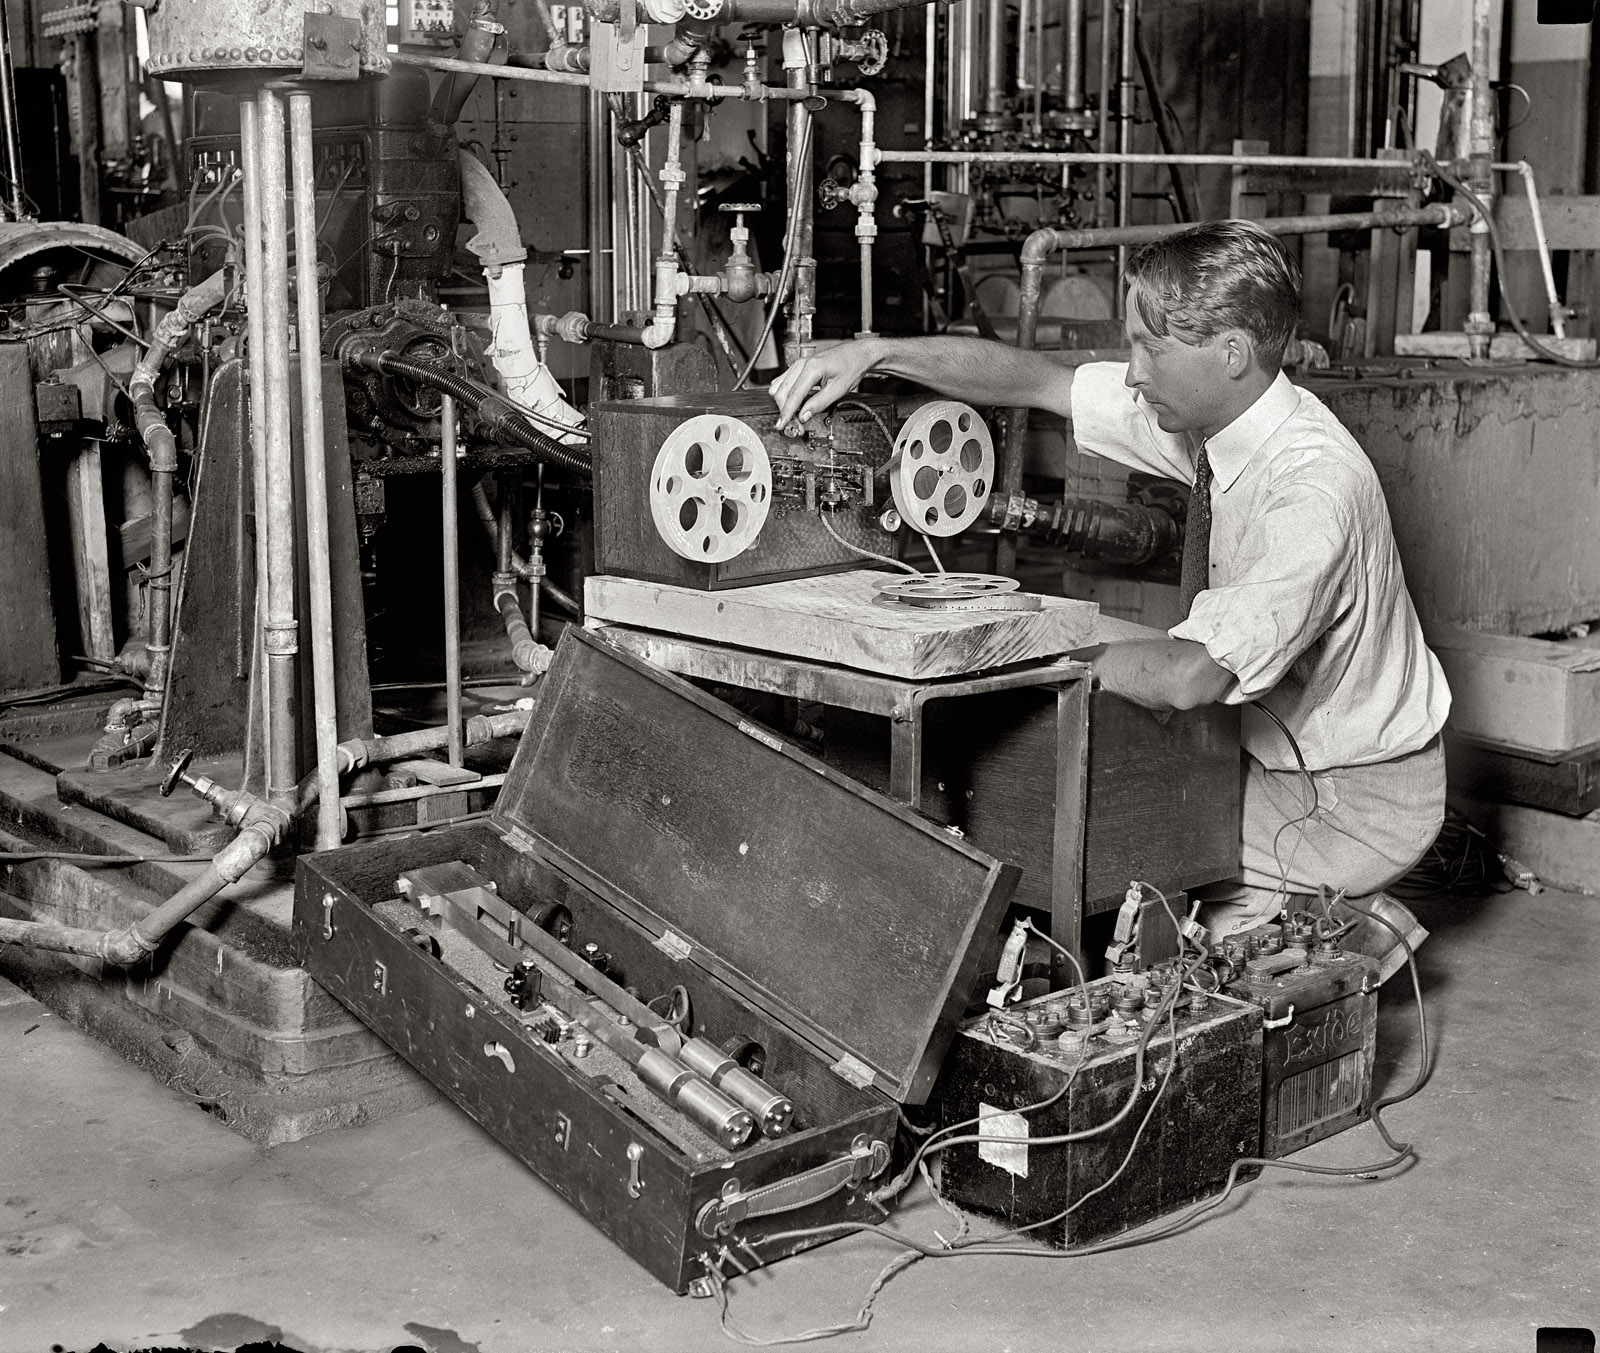 August 24, 1929. "Donald H. Brooks, Bureau of Standards." View full size. National Photo Company Collection glass negative. So -- what's he doing?